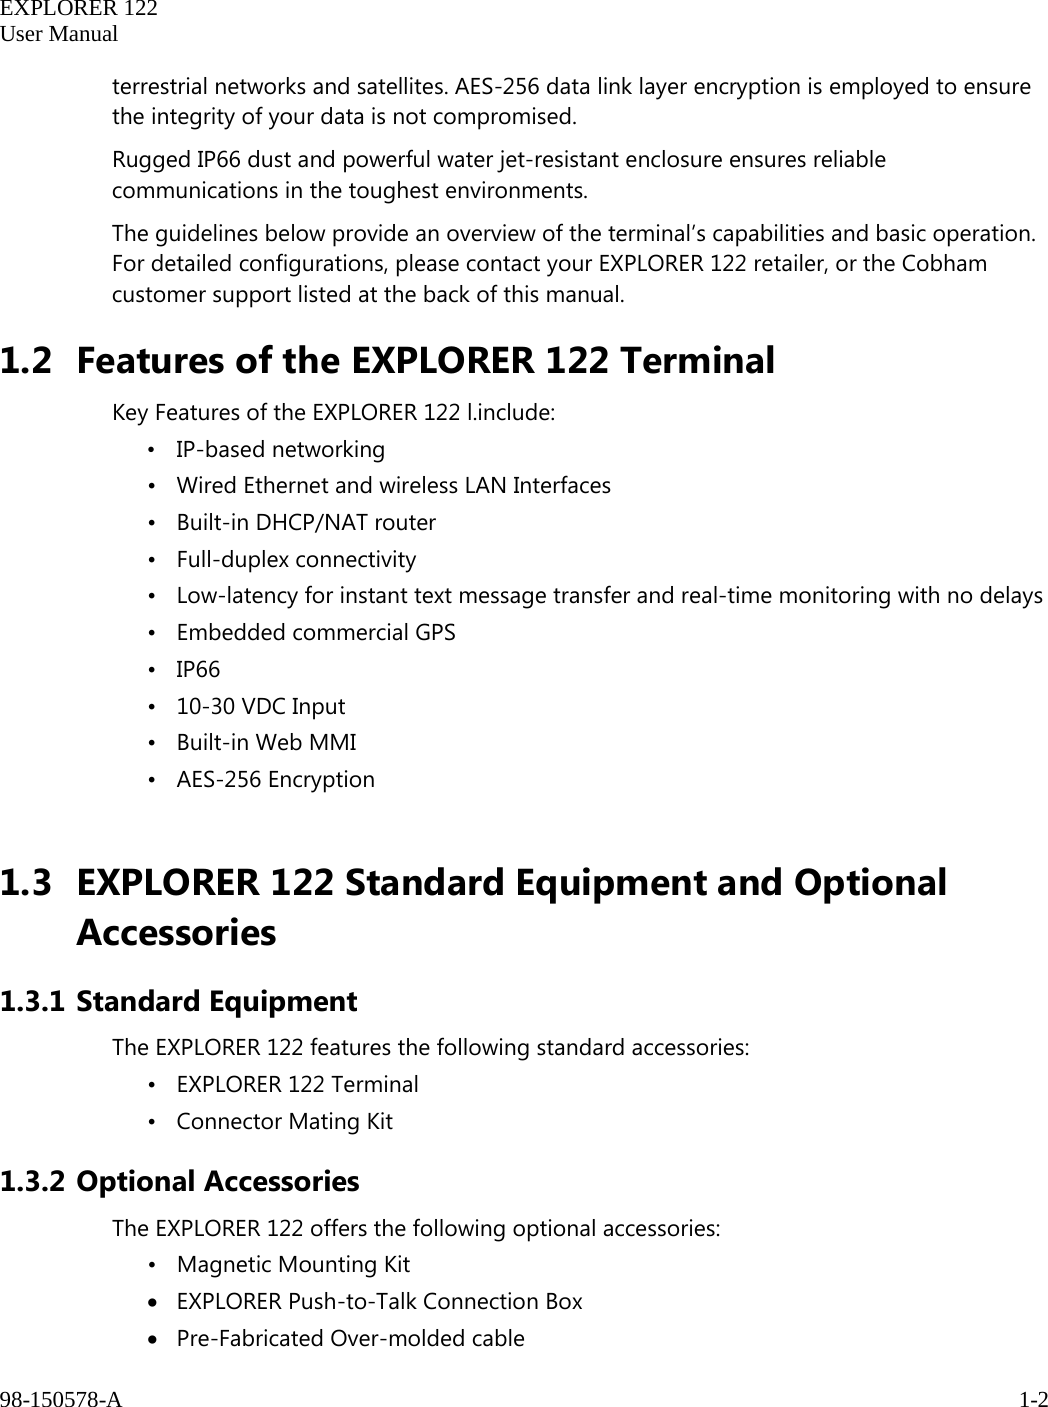   EXPLORER 122  User Manual  98-150578-A     1-2   terrestrial networks and satellites. AES-256 data link layer encryption is employed to ensure the integrity of your data is not compromised. Rugged IP66 dust and powerful water jet-resistant enclosure ensures reliable communications in the toughest environments. The guidelines below provide an overview of the terminal’s capabilities and basic operation. For detailed configurations, please contact your EXPLORER 122 retailer, or the Cobham customer support listed at the back of this manual. 1.2 Features of the EXPLORER 122 Terminal Key Features of the EXPLORER 122 l.include: • IP-based networking • Wired Ethernet and wireless LAN Interfaces • Built-in DHCP/NAT router • Full-duplex connectivity • Low-latency for instant text message transfer and real-time monitoring with no delays • Embedded commercial GPS    • IP66   • 10-30 VDC Input • Built-in Web MMI • AES-256 Encryption  1.3 EXPLORER 122 Standard Equipment and Optional Accessories 1.3.1 Standard Equipment The EXPLORER 122 features the following standard accessories: • EXPLORER 122 Terminal • Connector Mating Kit 1.3.2 Optional Accessories The EXPLORER 122 offers the following optional accessories:   •   Magnetic Mounting Kit • EXPLORER Push-to-Talk Connection Box  • Pre-Fabricated Over-molded cable 